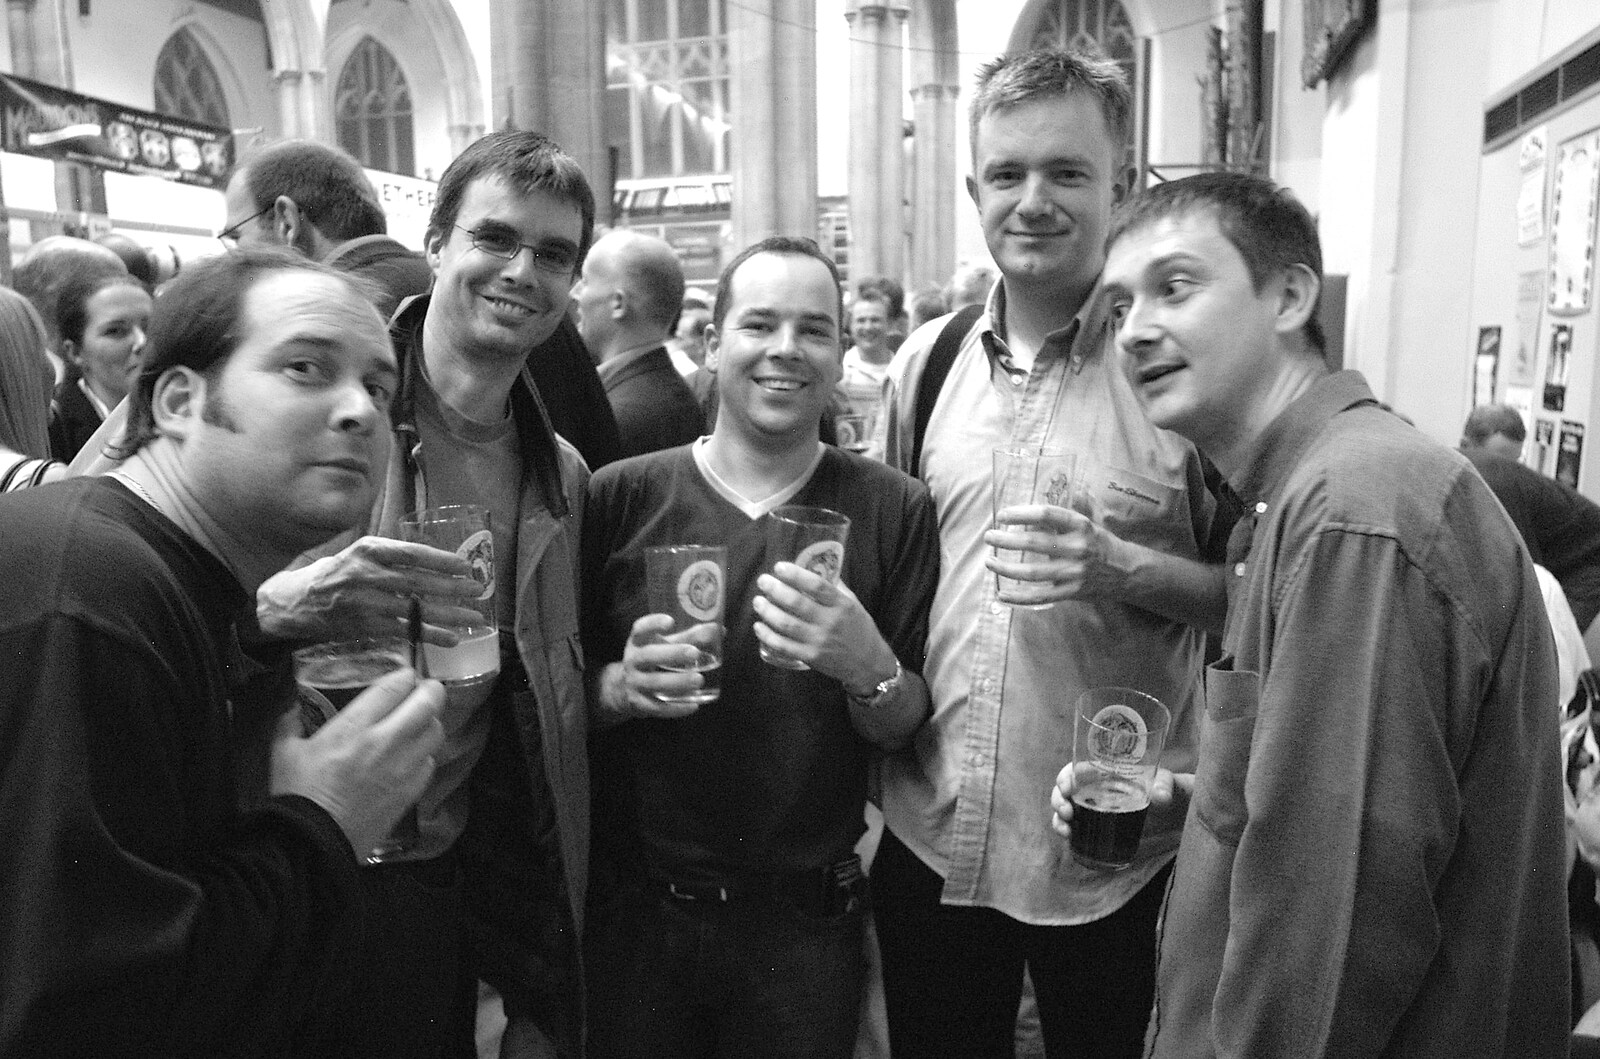 Russell, Dan 'Parrott', Russell, Nosher and Andrew B from The 28th Norwich Beer Festival, St. Andrew's Hall, Norwich - 26th October 2005